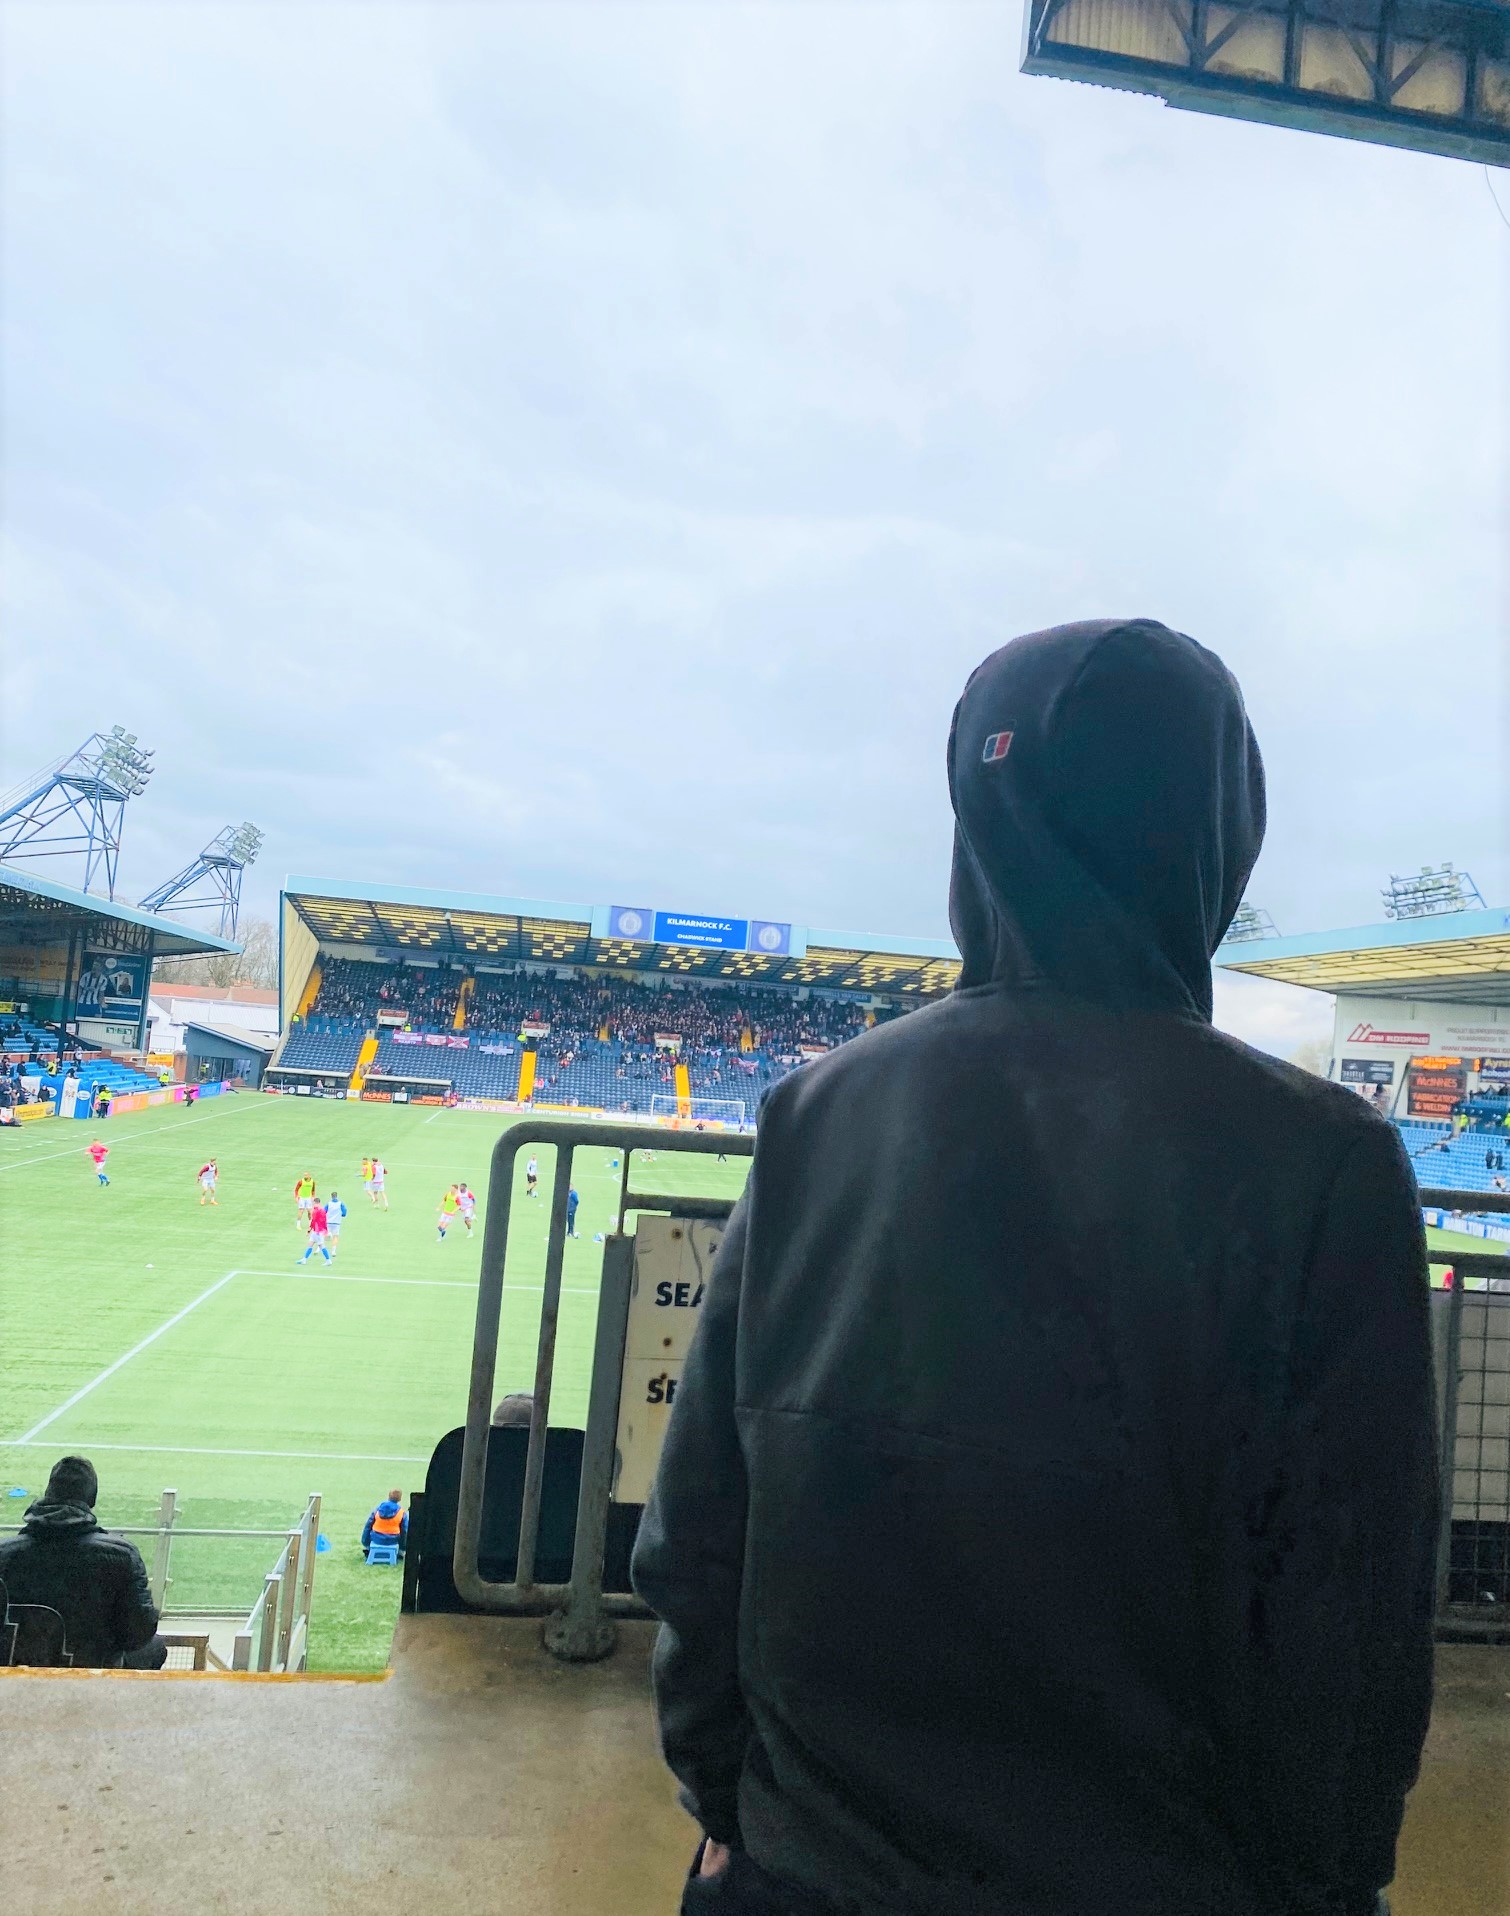 A young person enjoying a football match at Rugby Park